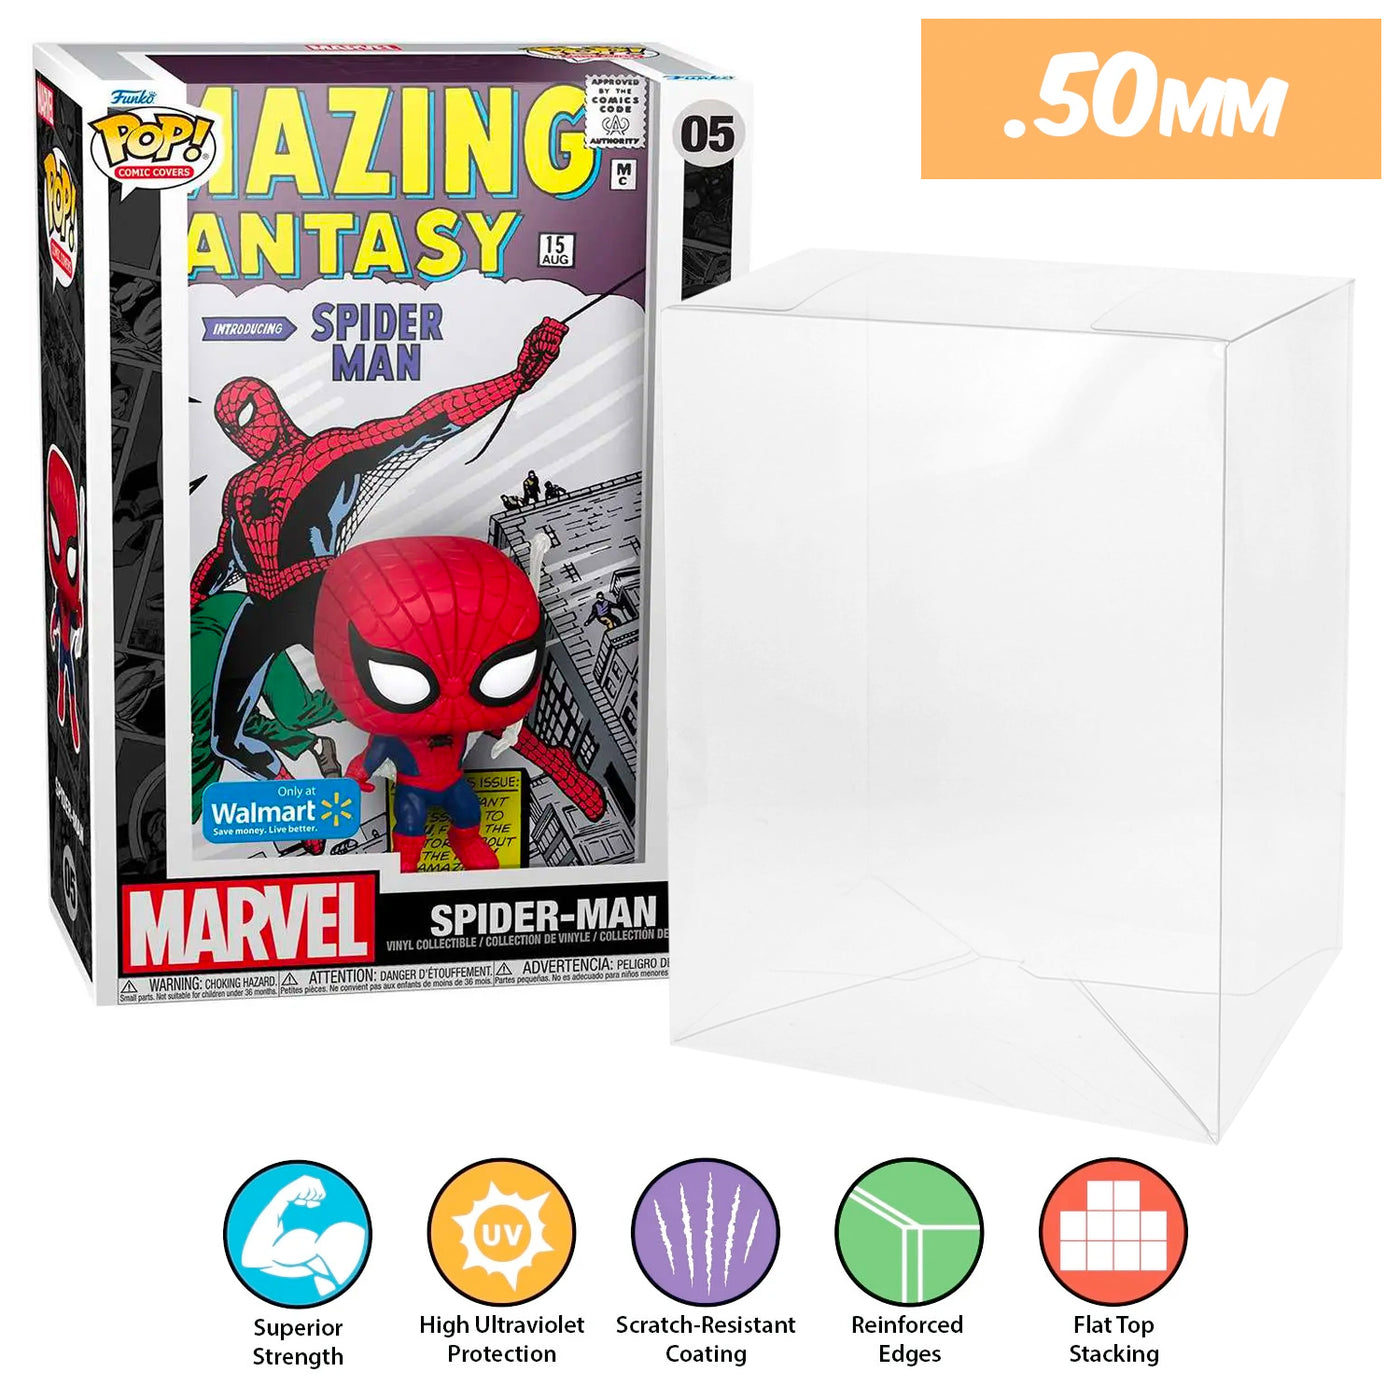 marvel spider-man amazing fantasy walmart pop comic covers best funko pop protectors thick strong uv scratch flat top stack vinyl display geek plastic shield vaulted eco armor fits collect protect display case kollector protector